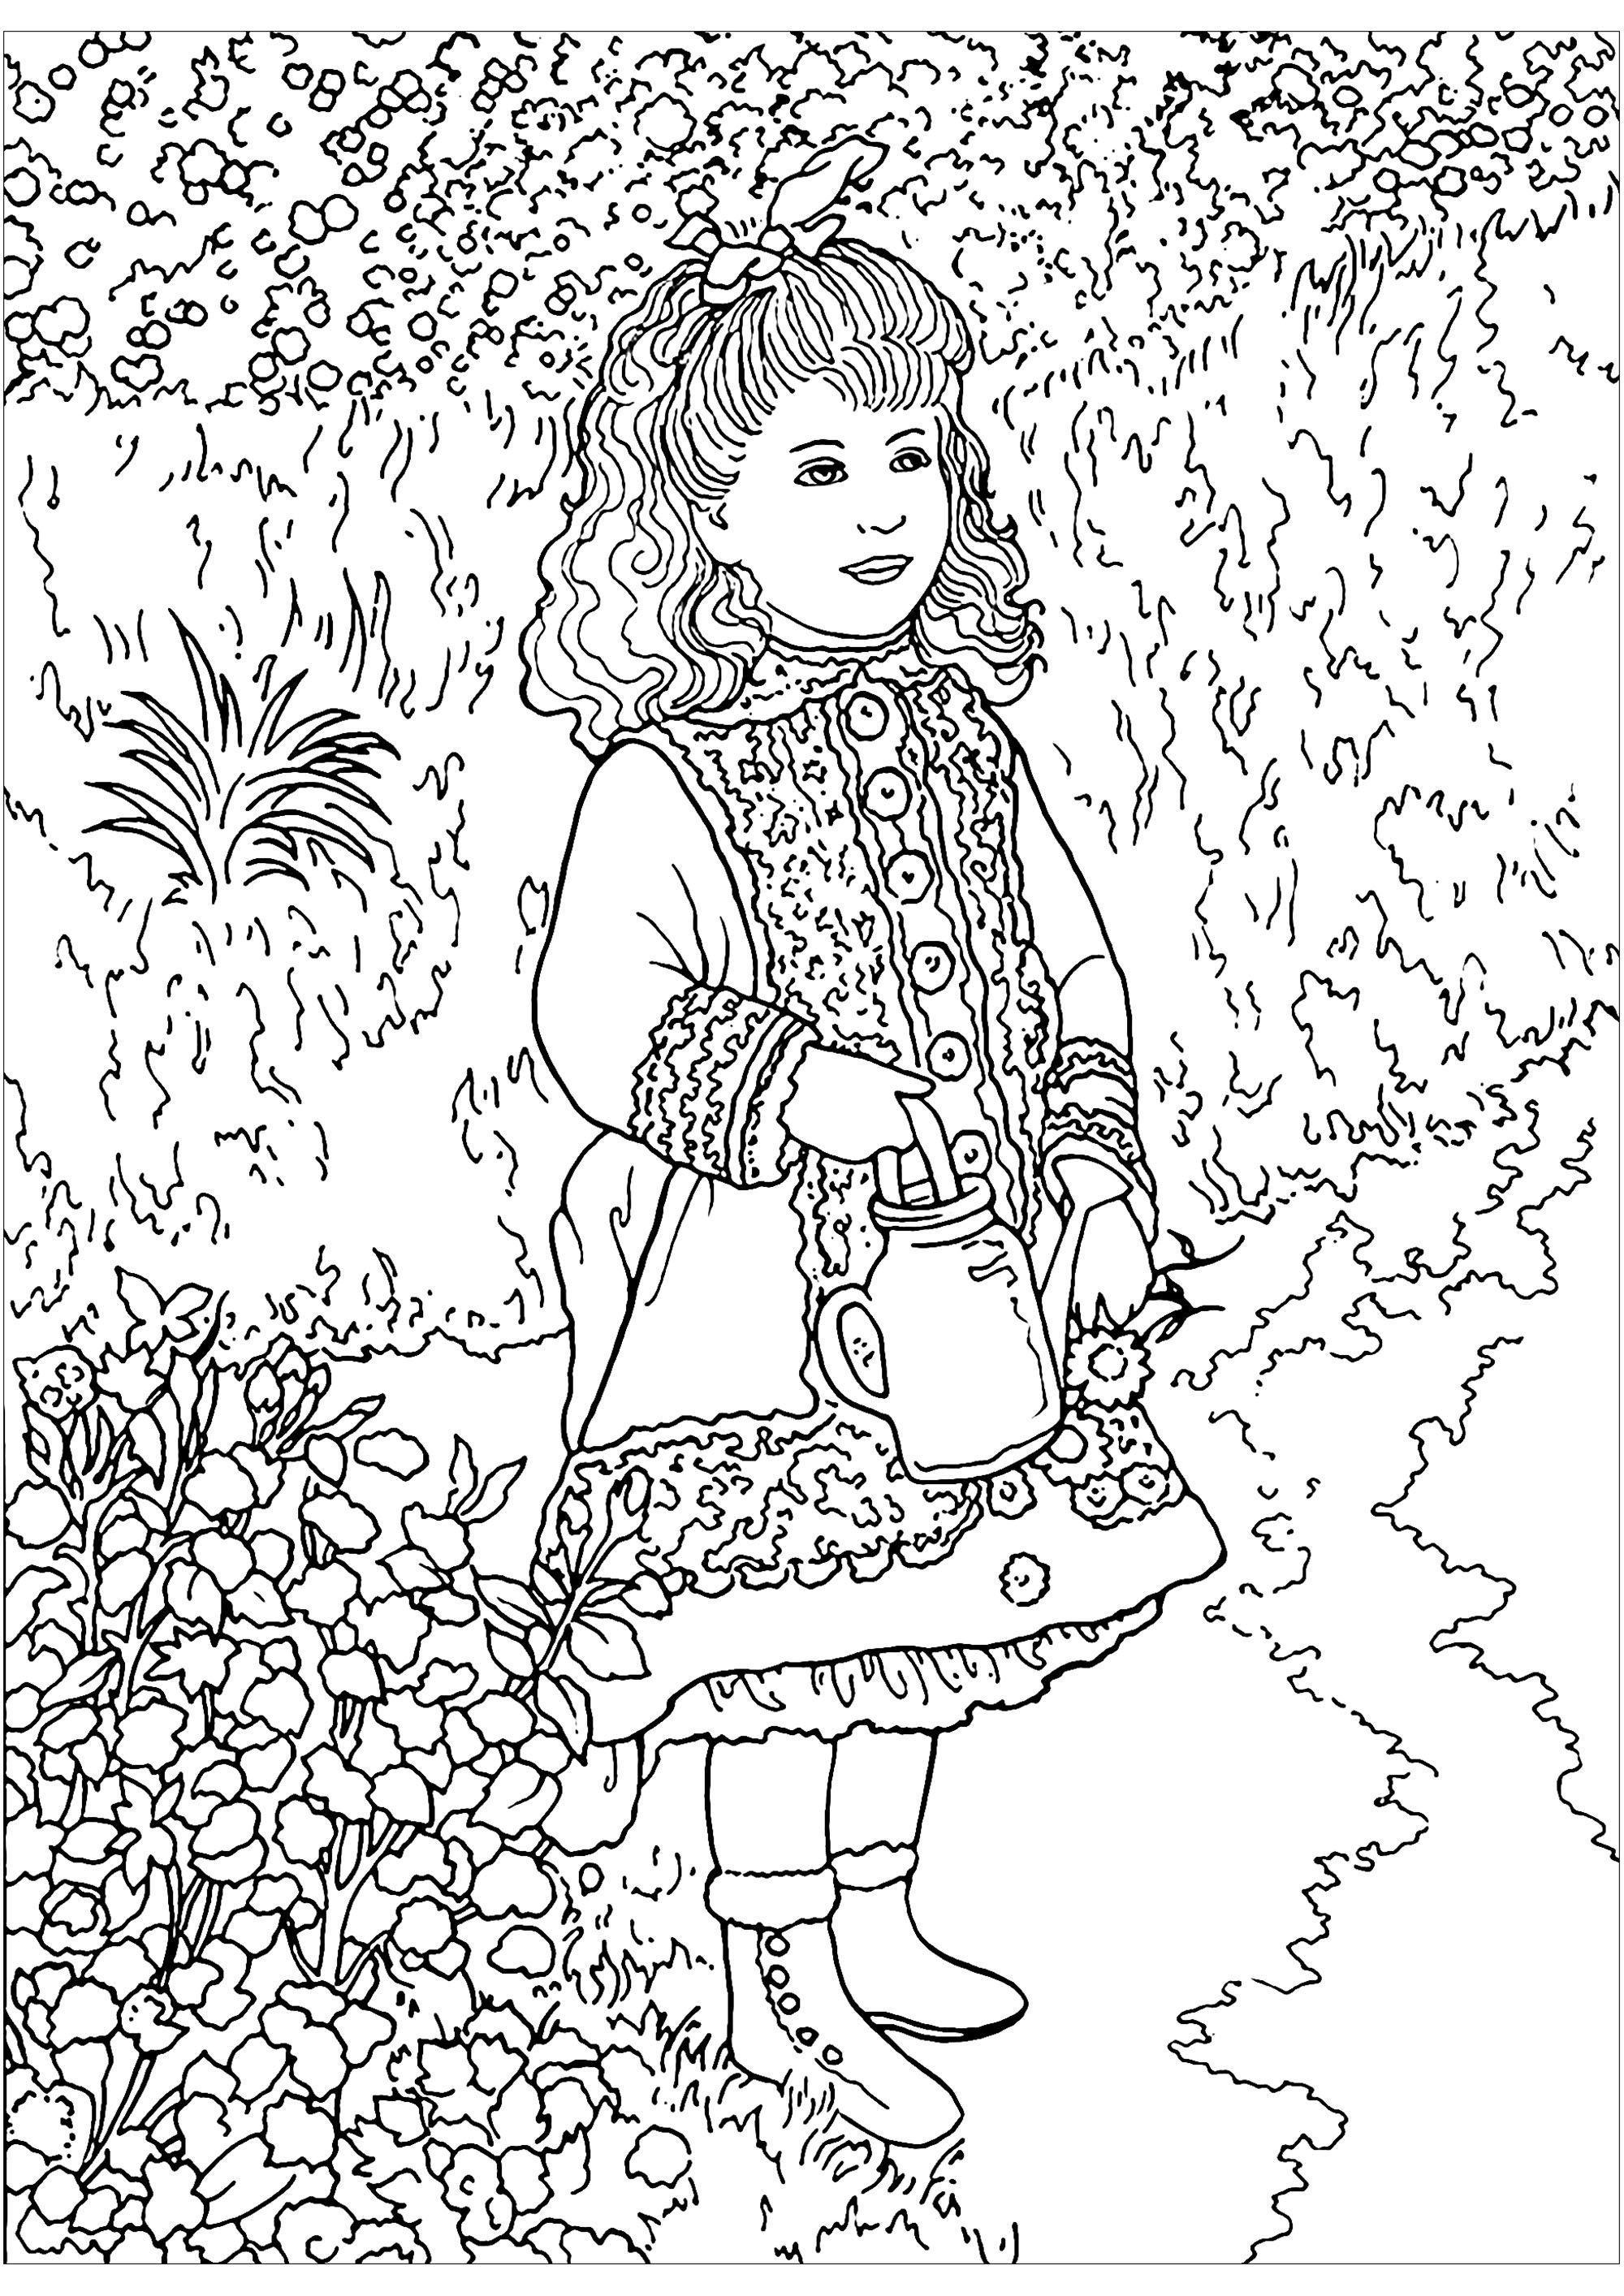 Coloring page inspired by a masterpiece by impressionist painter pierre